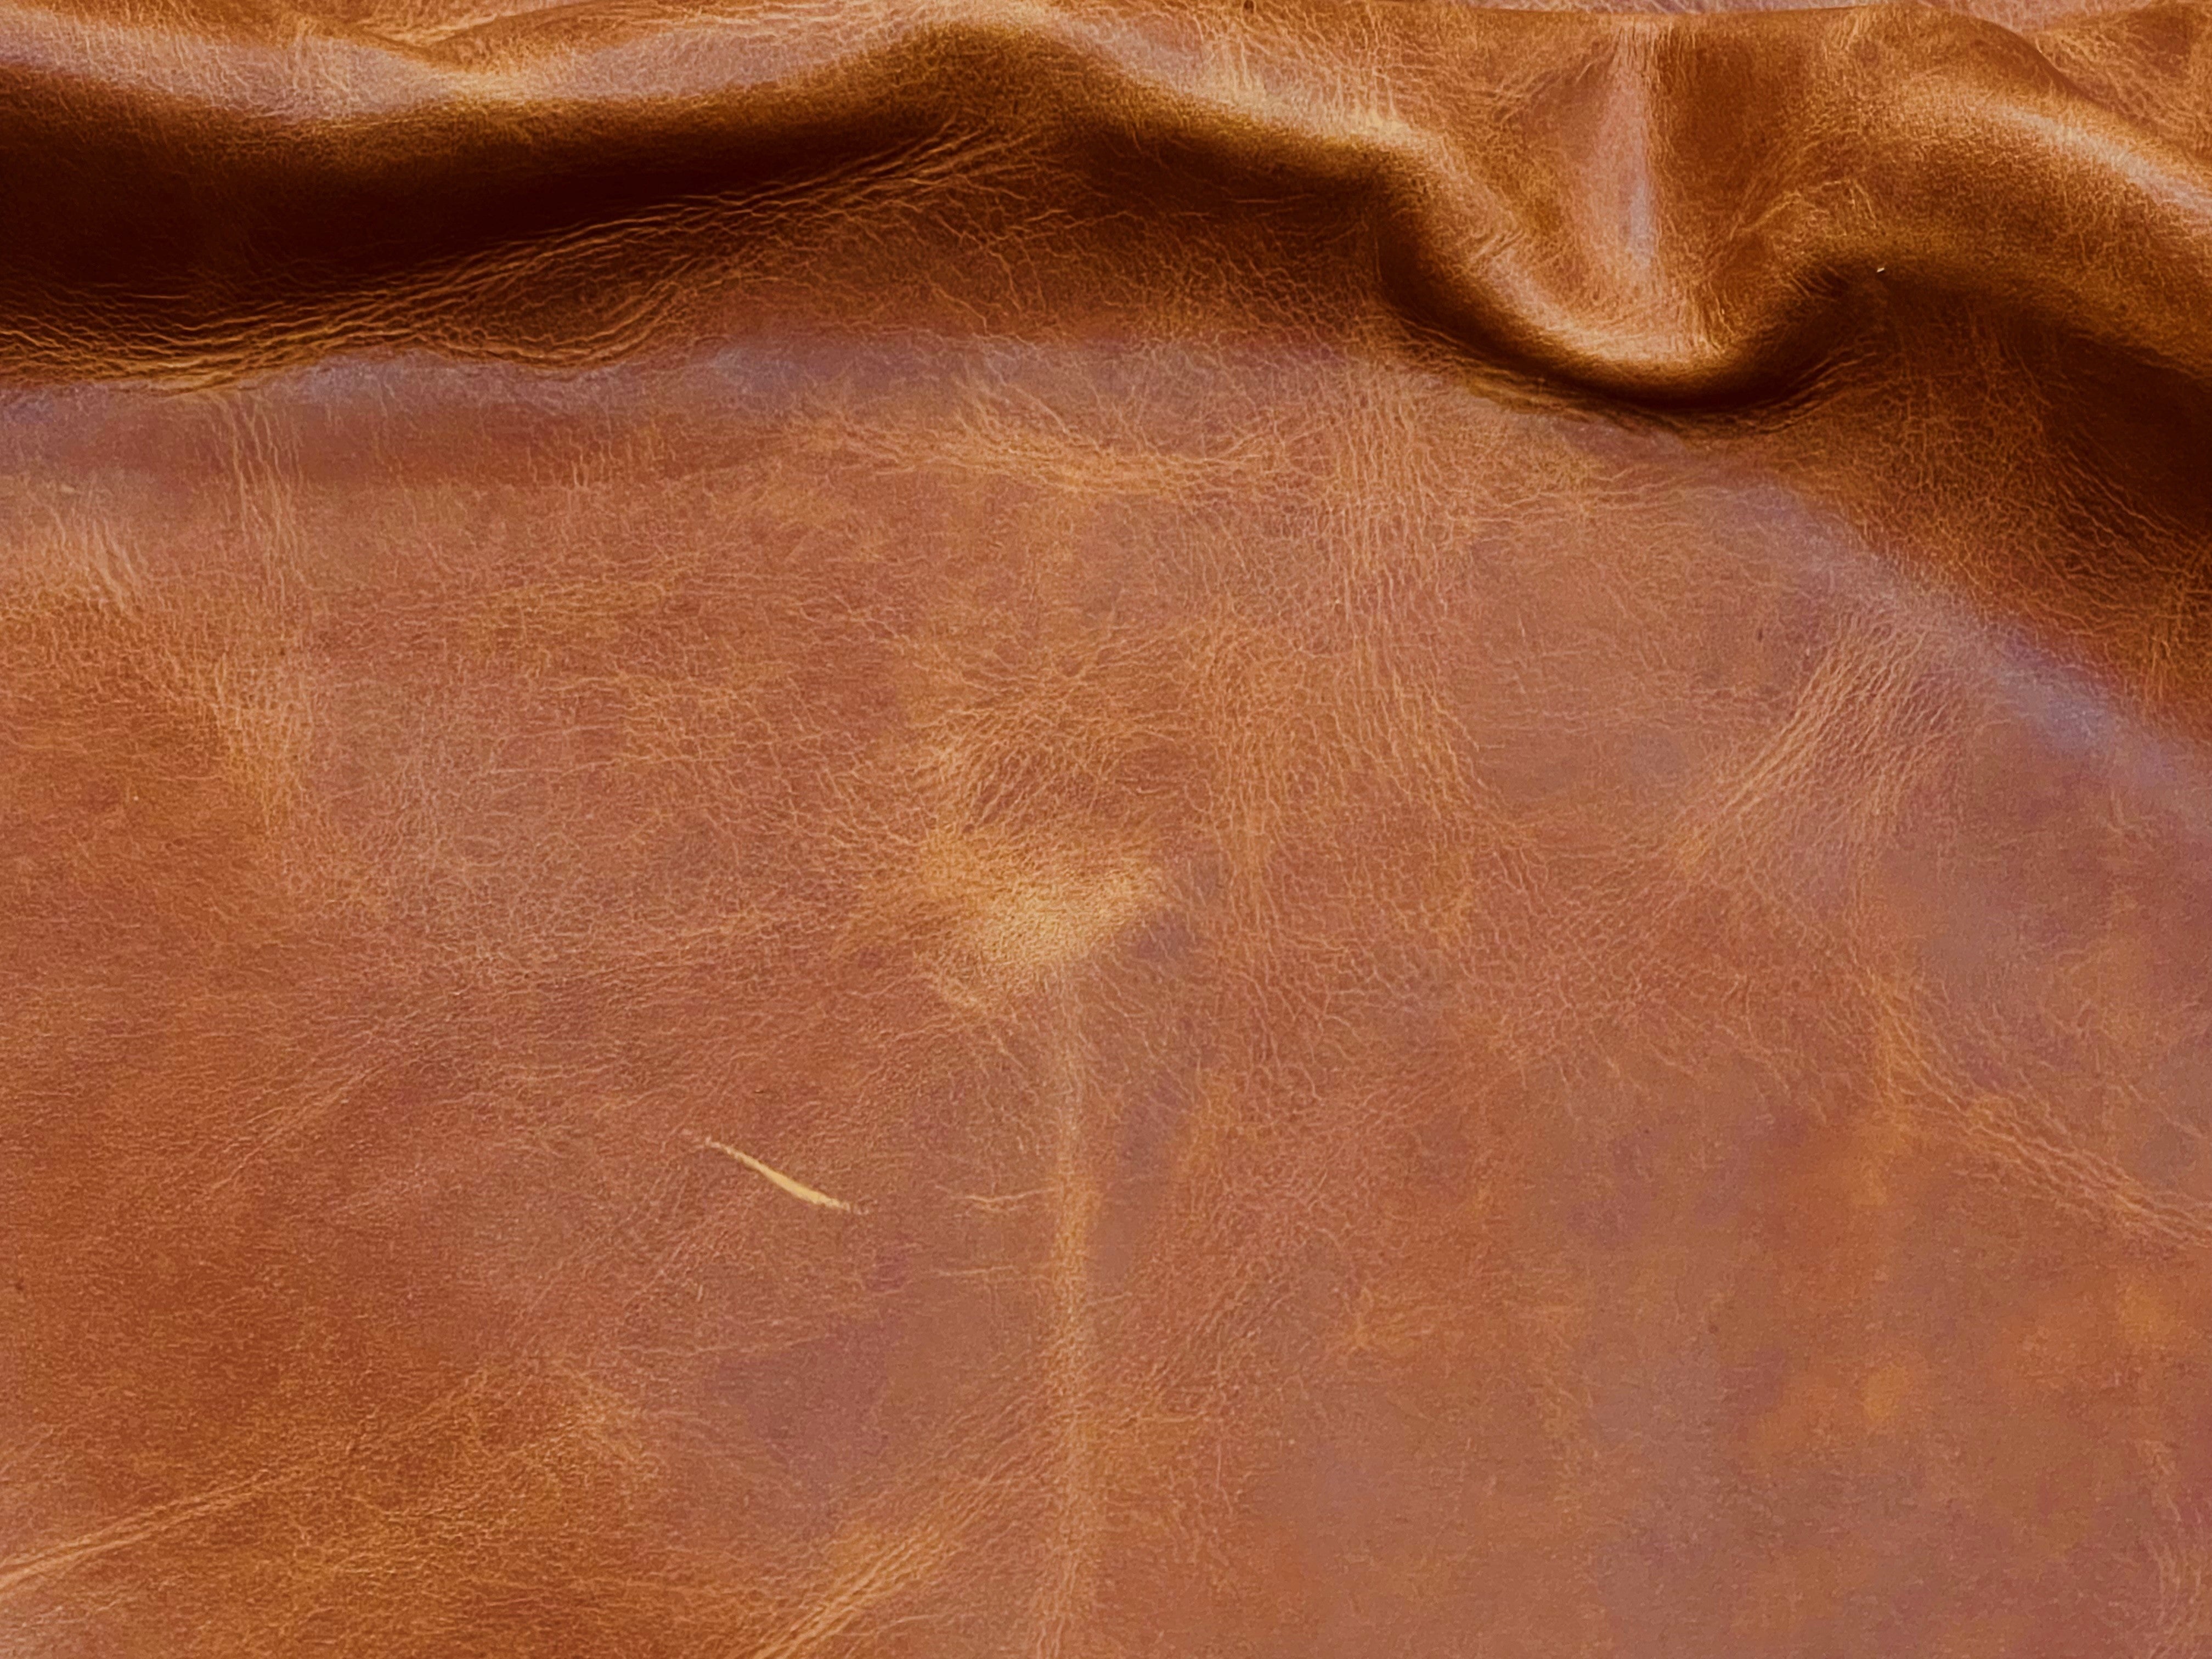 Diesel Toffee, Waxy Pull Up South American Leather Cow Hide : (1.1-1.3mm 3oz) 22